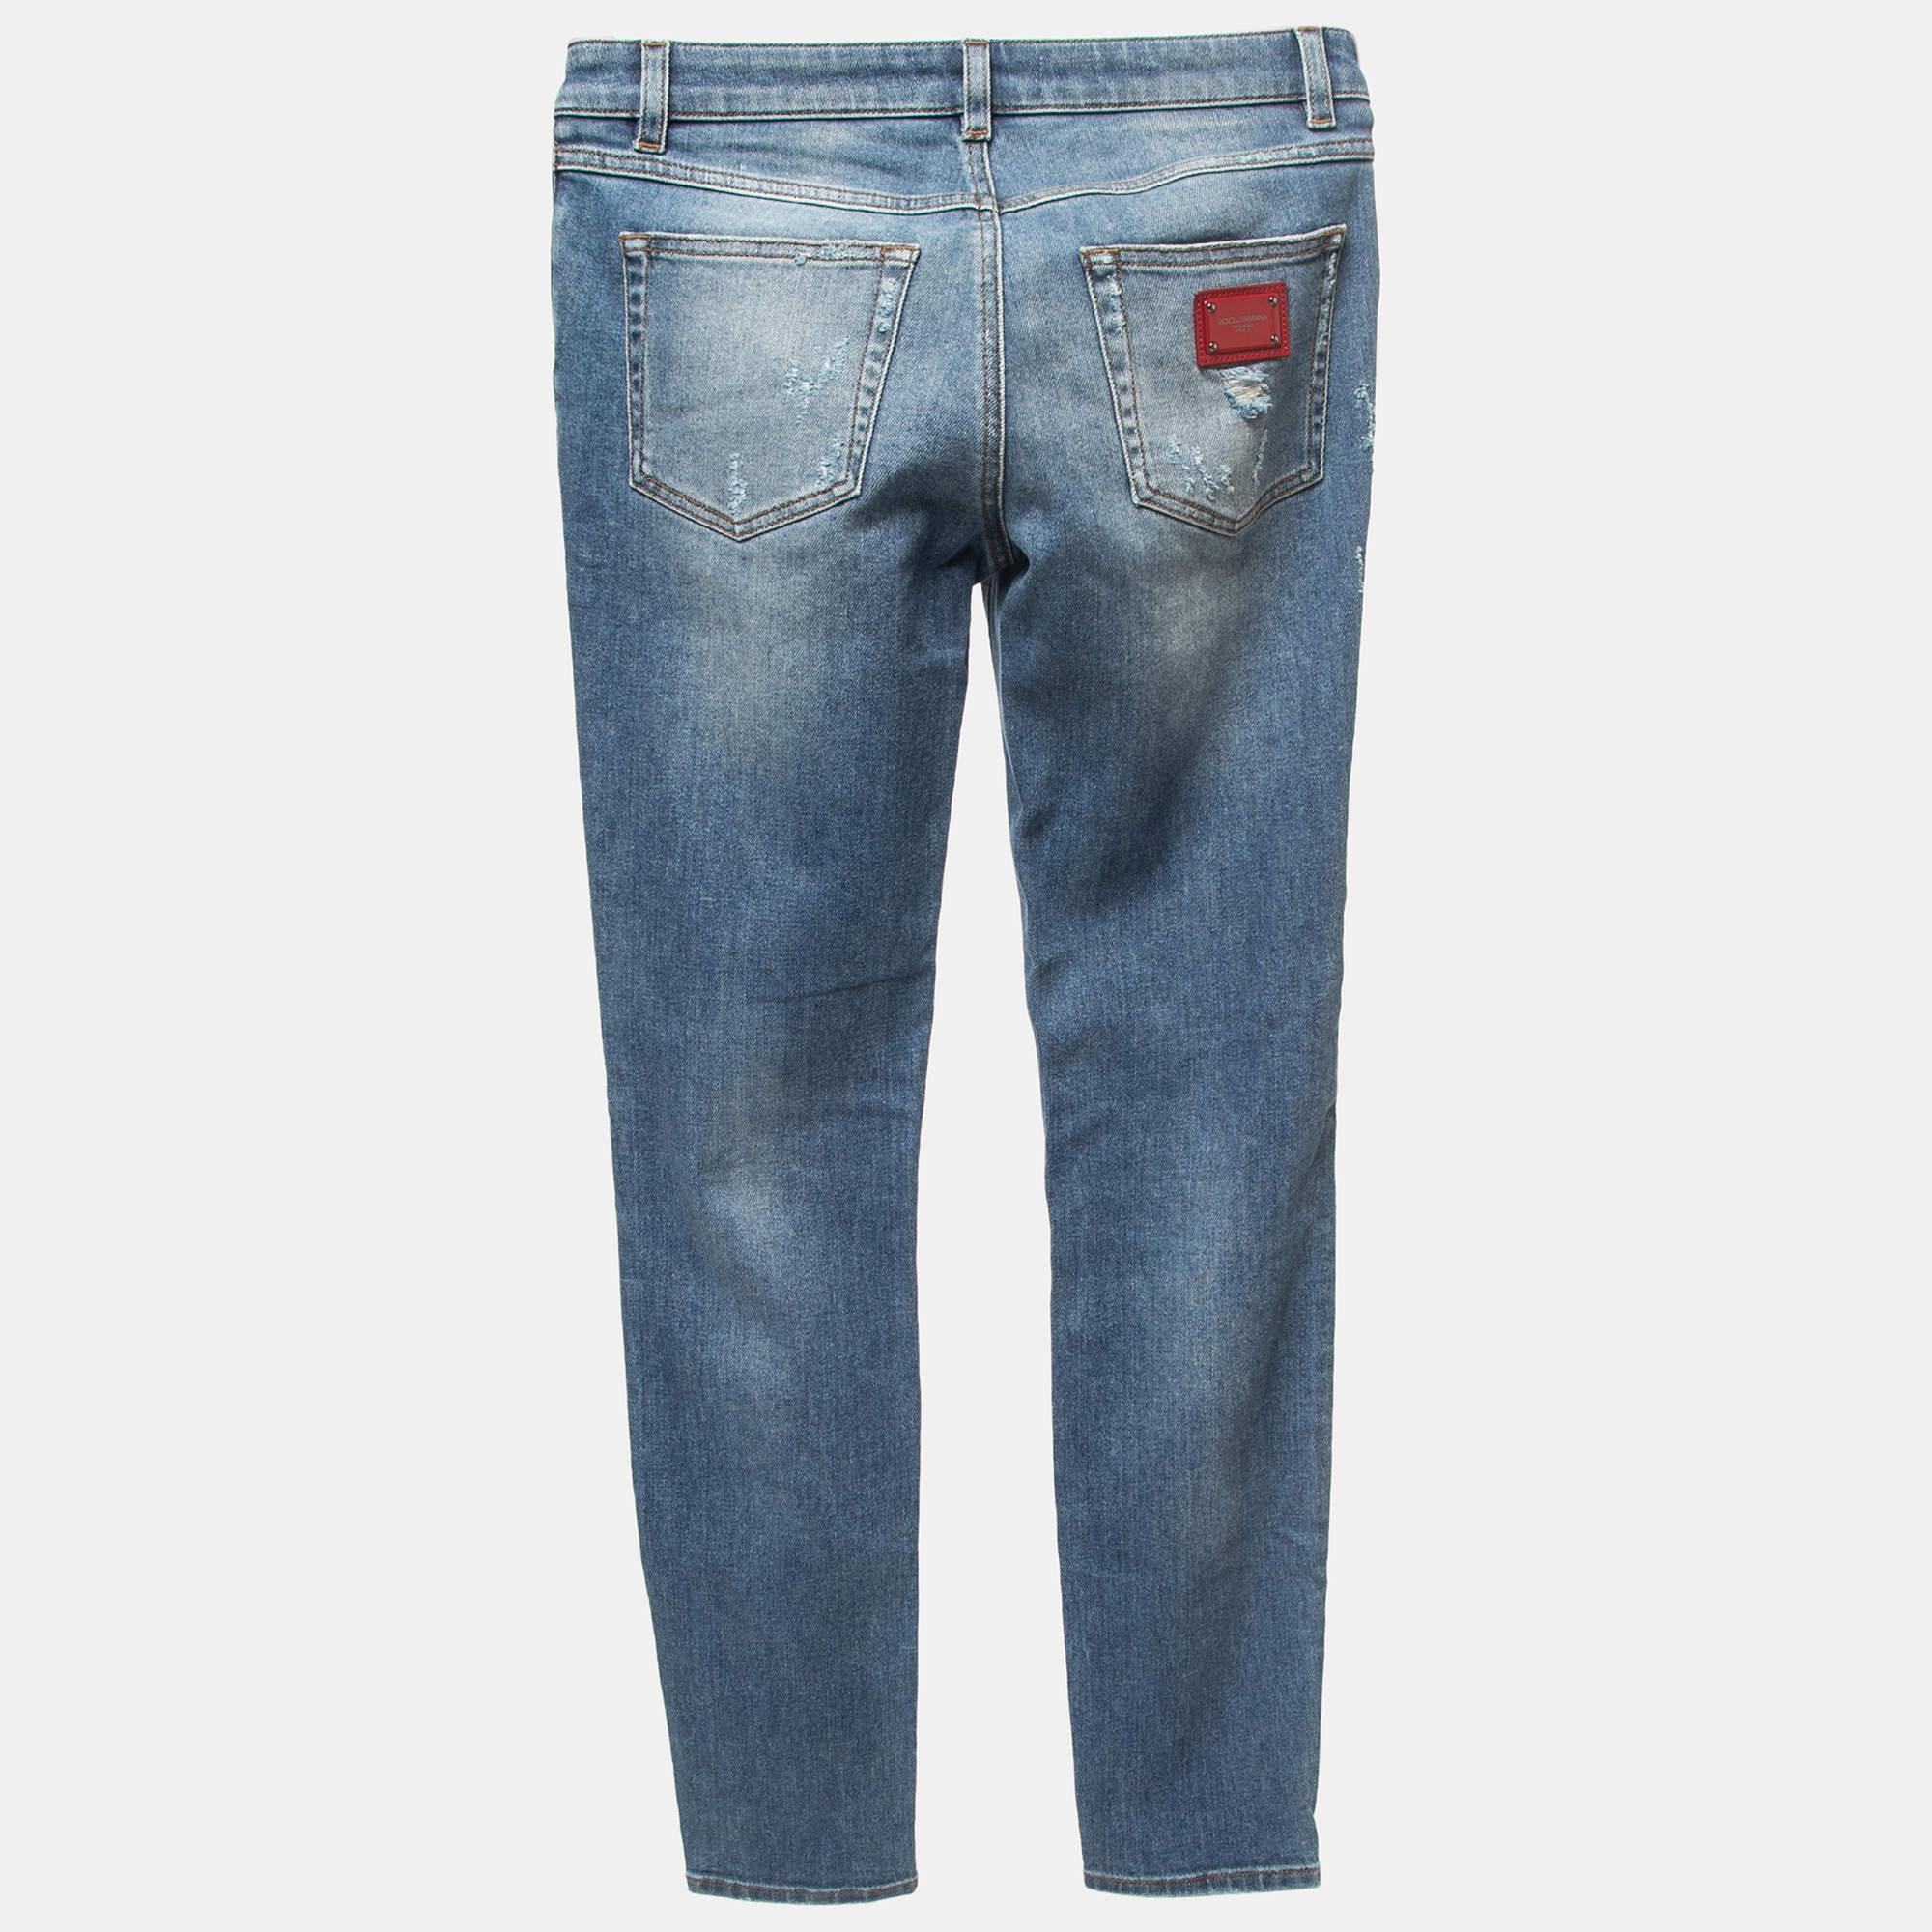 These Dolce & Gabbana jeans are a must-have wardrobe essential. These blue skinny jeans can be dressed both up and down for looks that are either casual and comfy or chic and fashionable.

